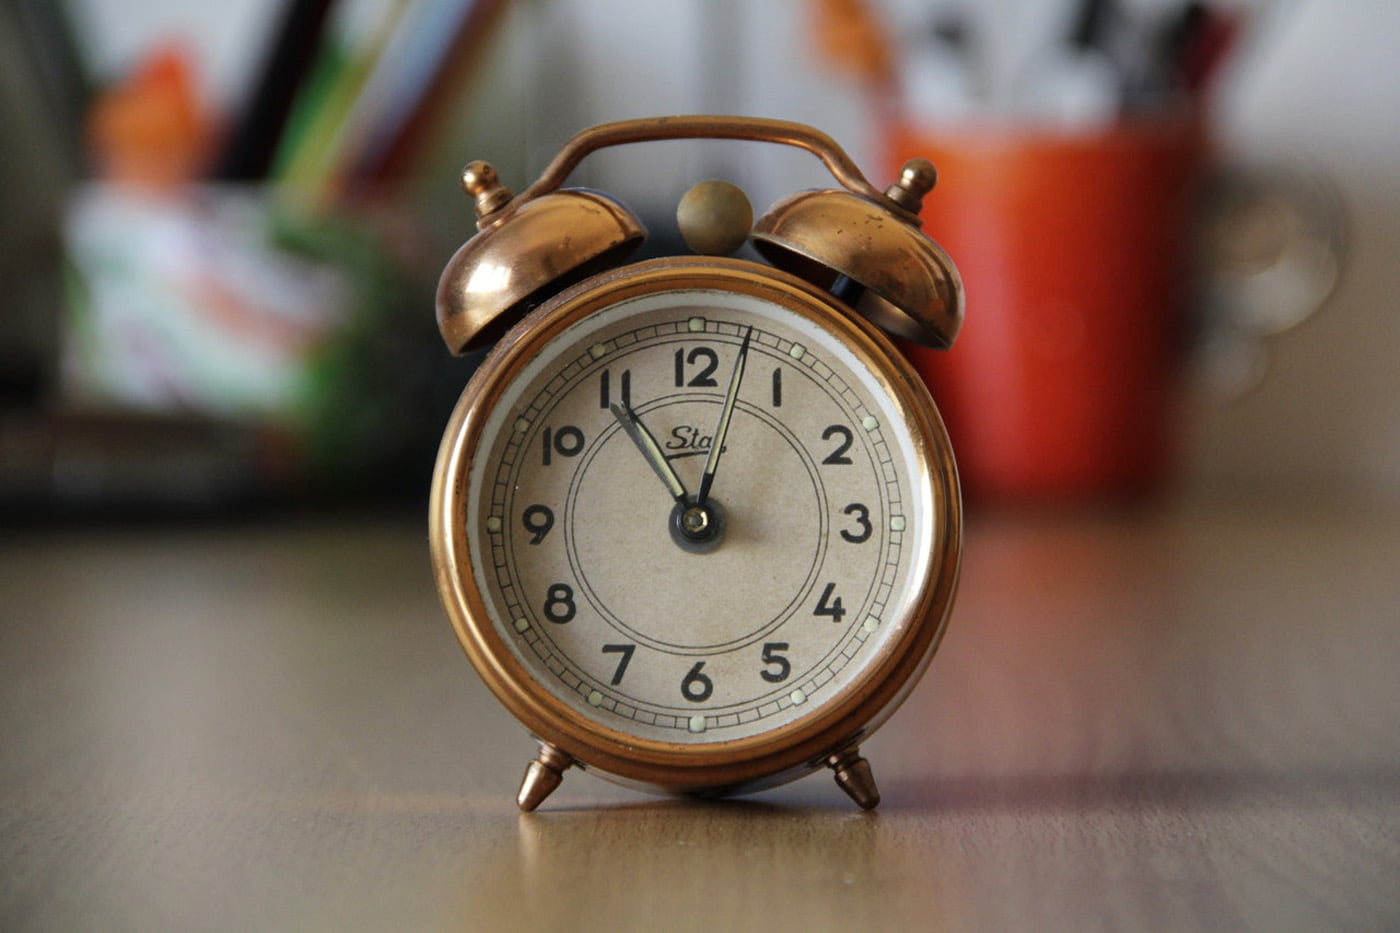 Get Your Family Ready for the Clocks Change - 5 Top Tips!